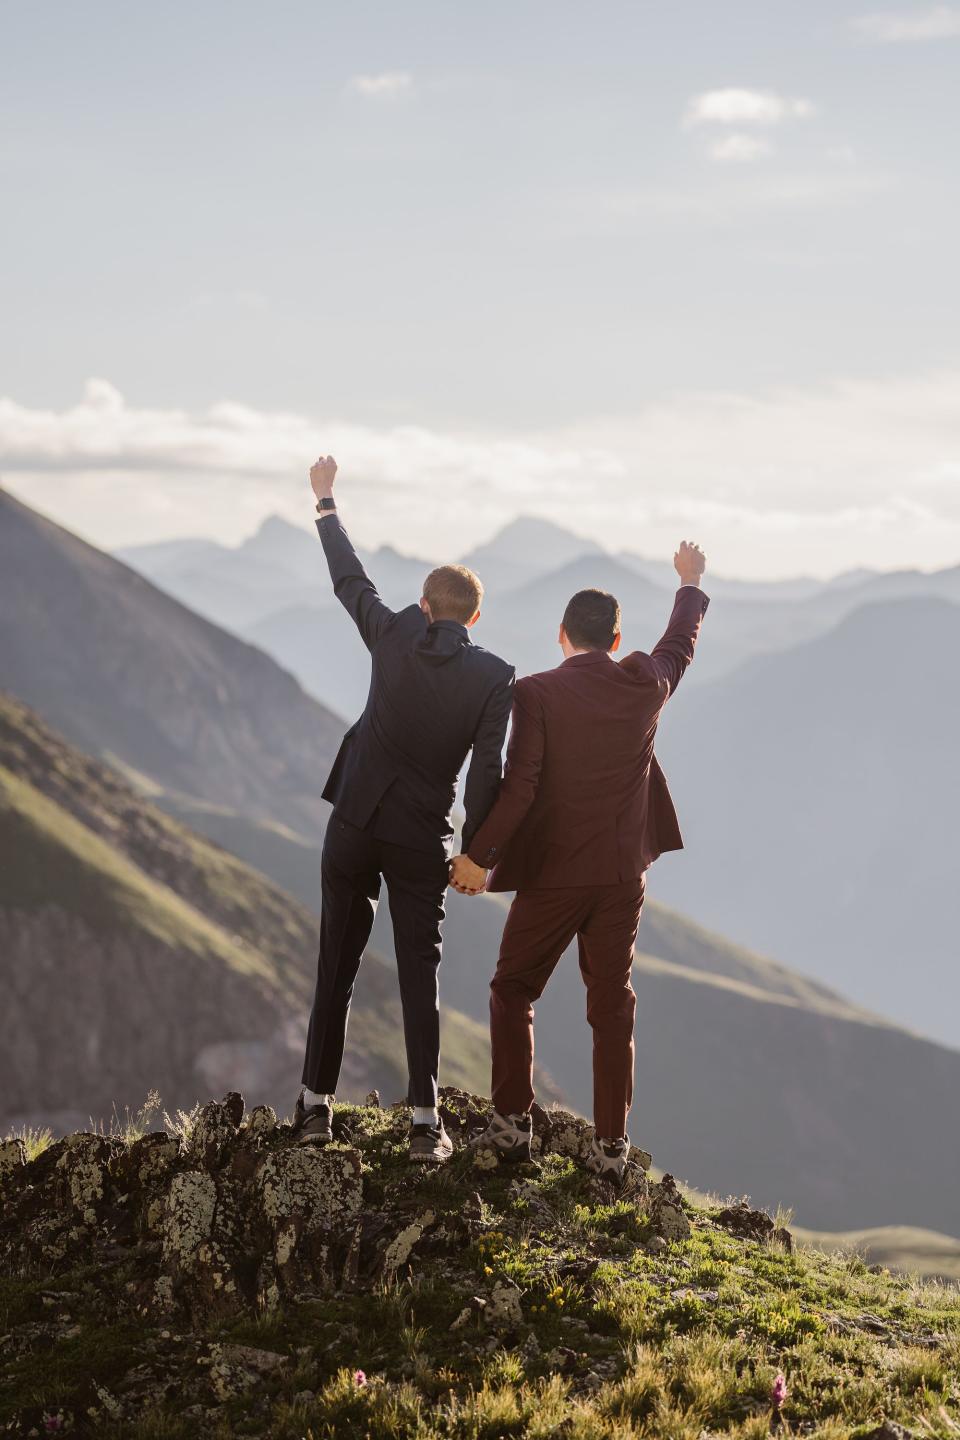 Two grooms raise their hands up while holding hands in front of a mountain landscape.